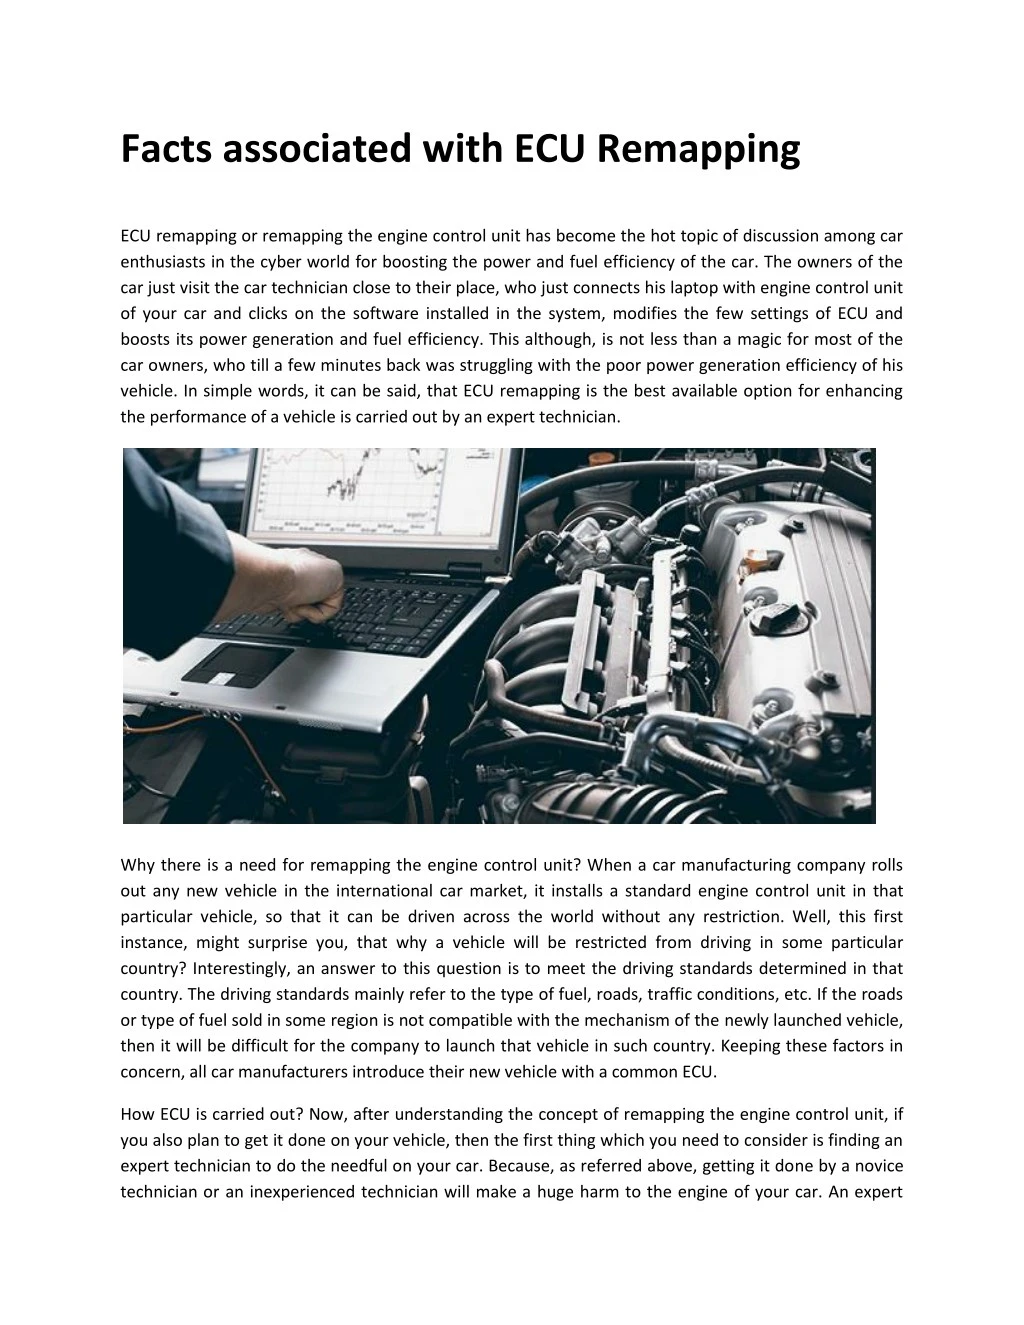 facts associated with ecu remapping